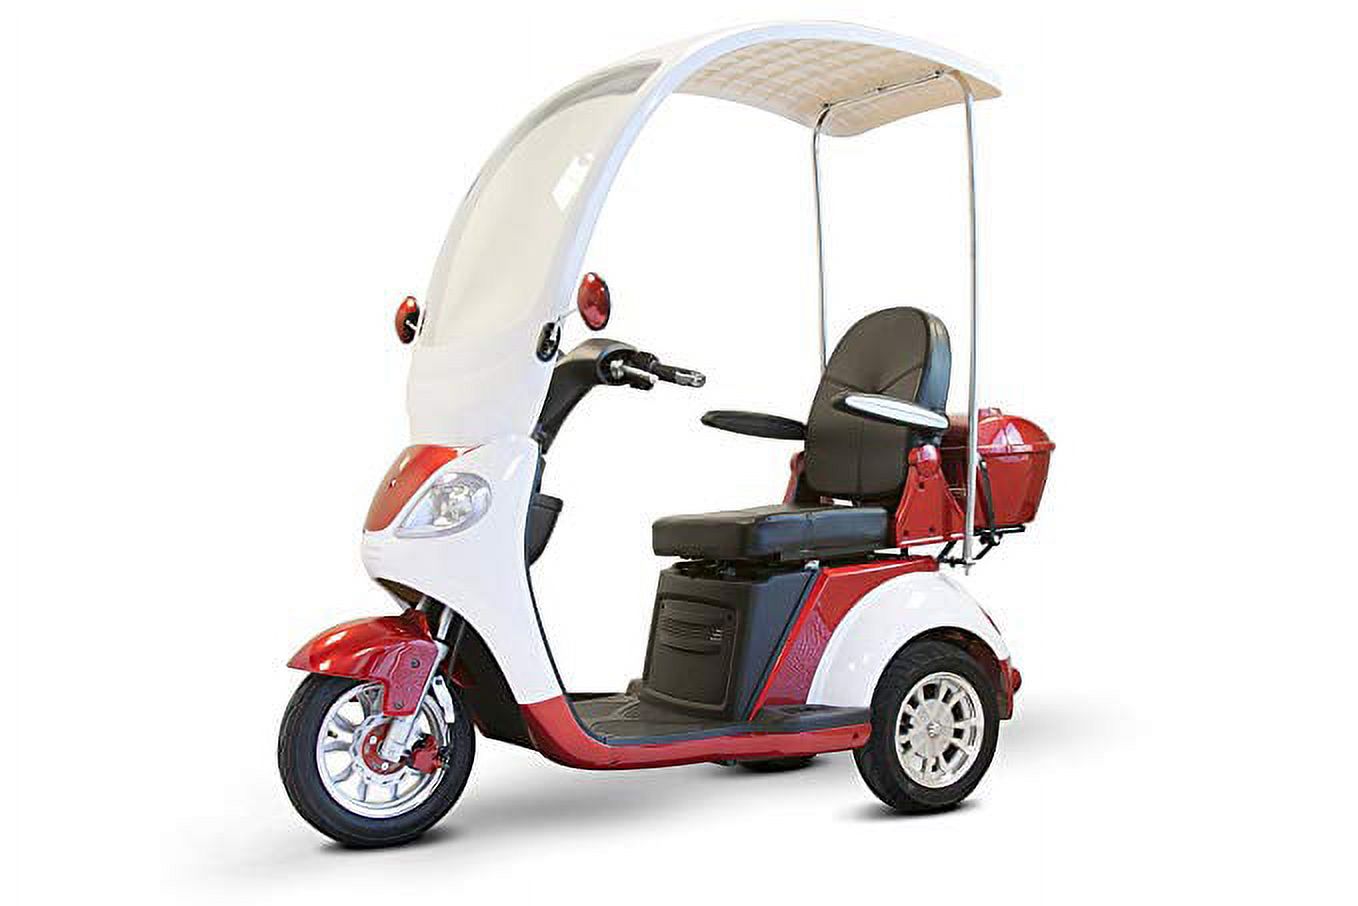 Ewheels Ewheels Luxurious Electric Oversized Scooter with Full Canopy Red - image 3 of 3